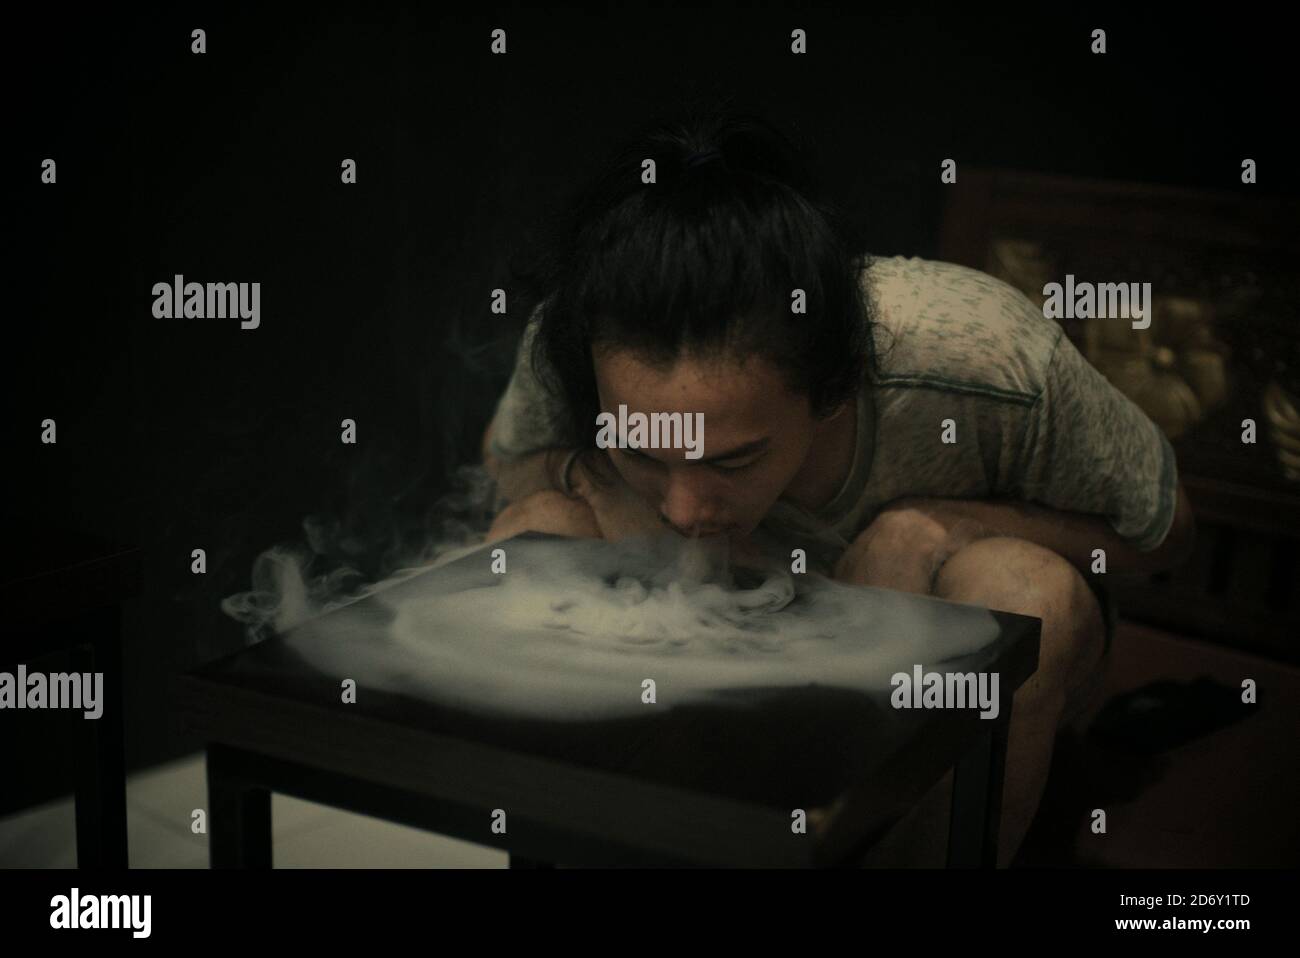 A vaping enthusiast having fun during leisure time, creating 'tornado shape' using e-cigarette vapours at a vape cafe in Banten province, Indonesia. Stock Photo